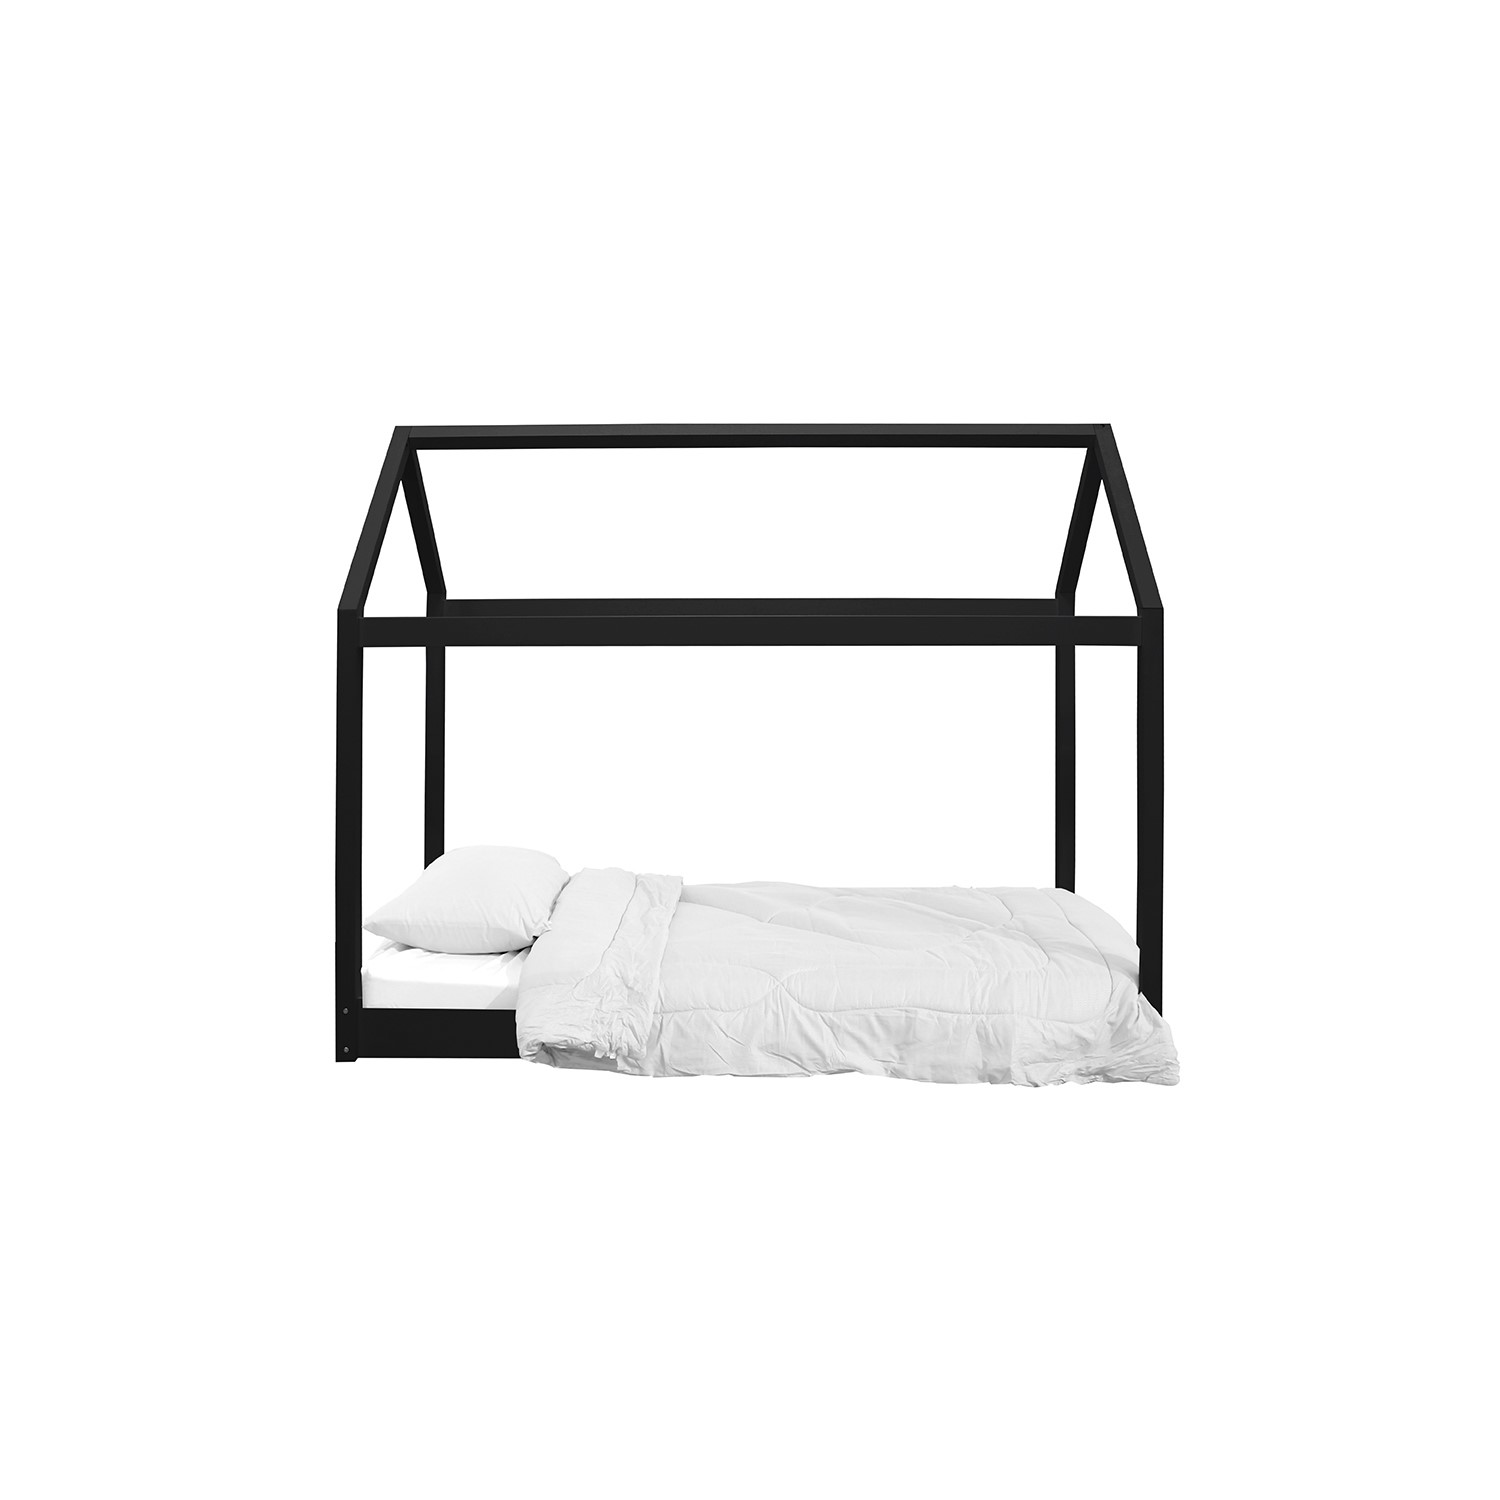 Read more about House single bed frame in black hickory lpd